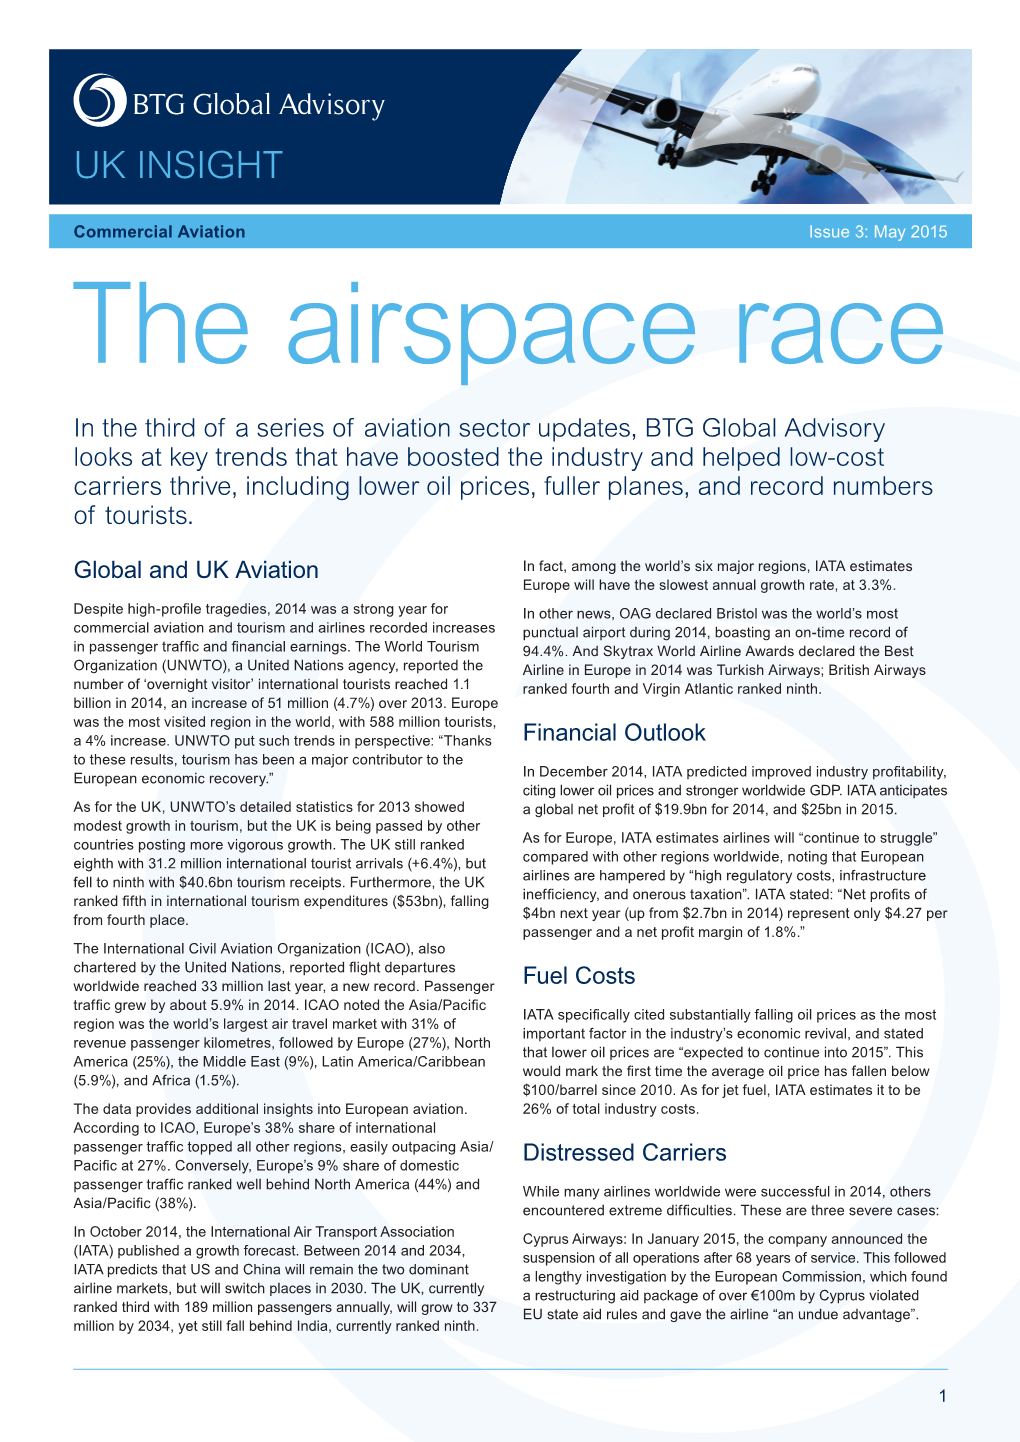 Aviation: the Airspace Race